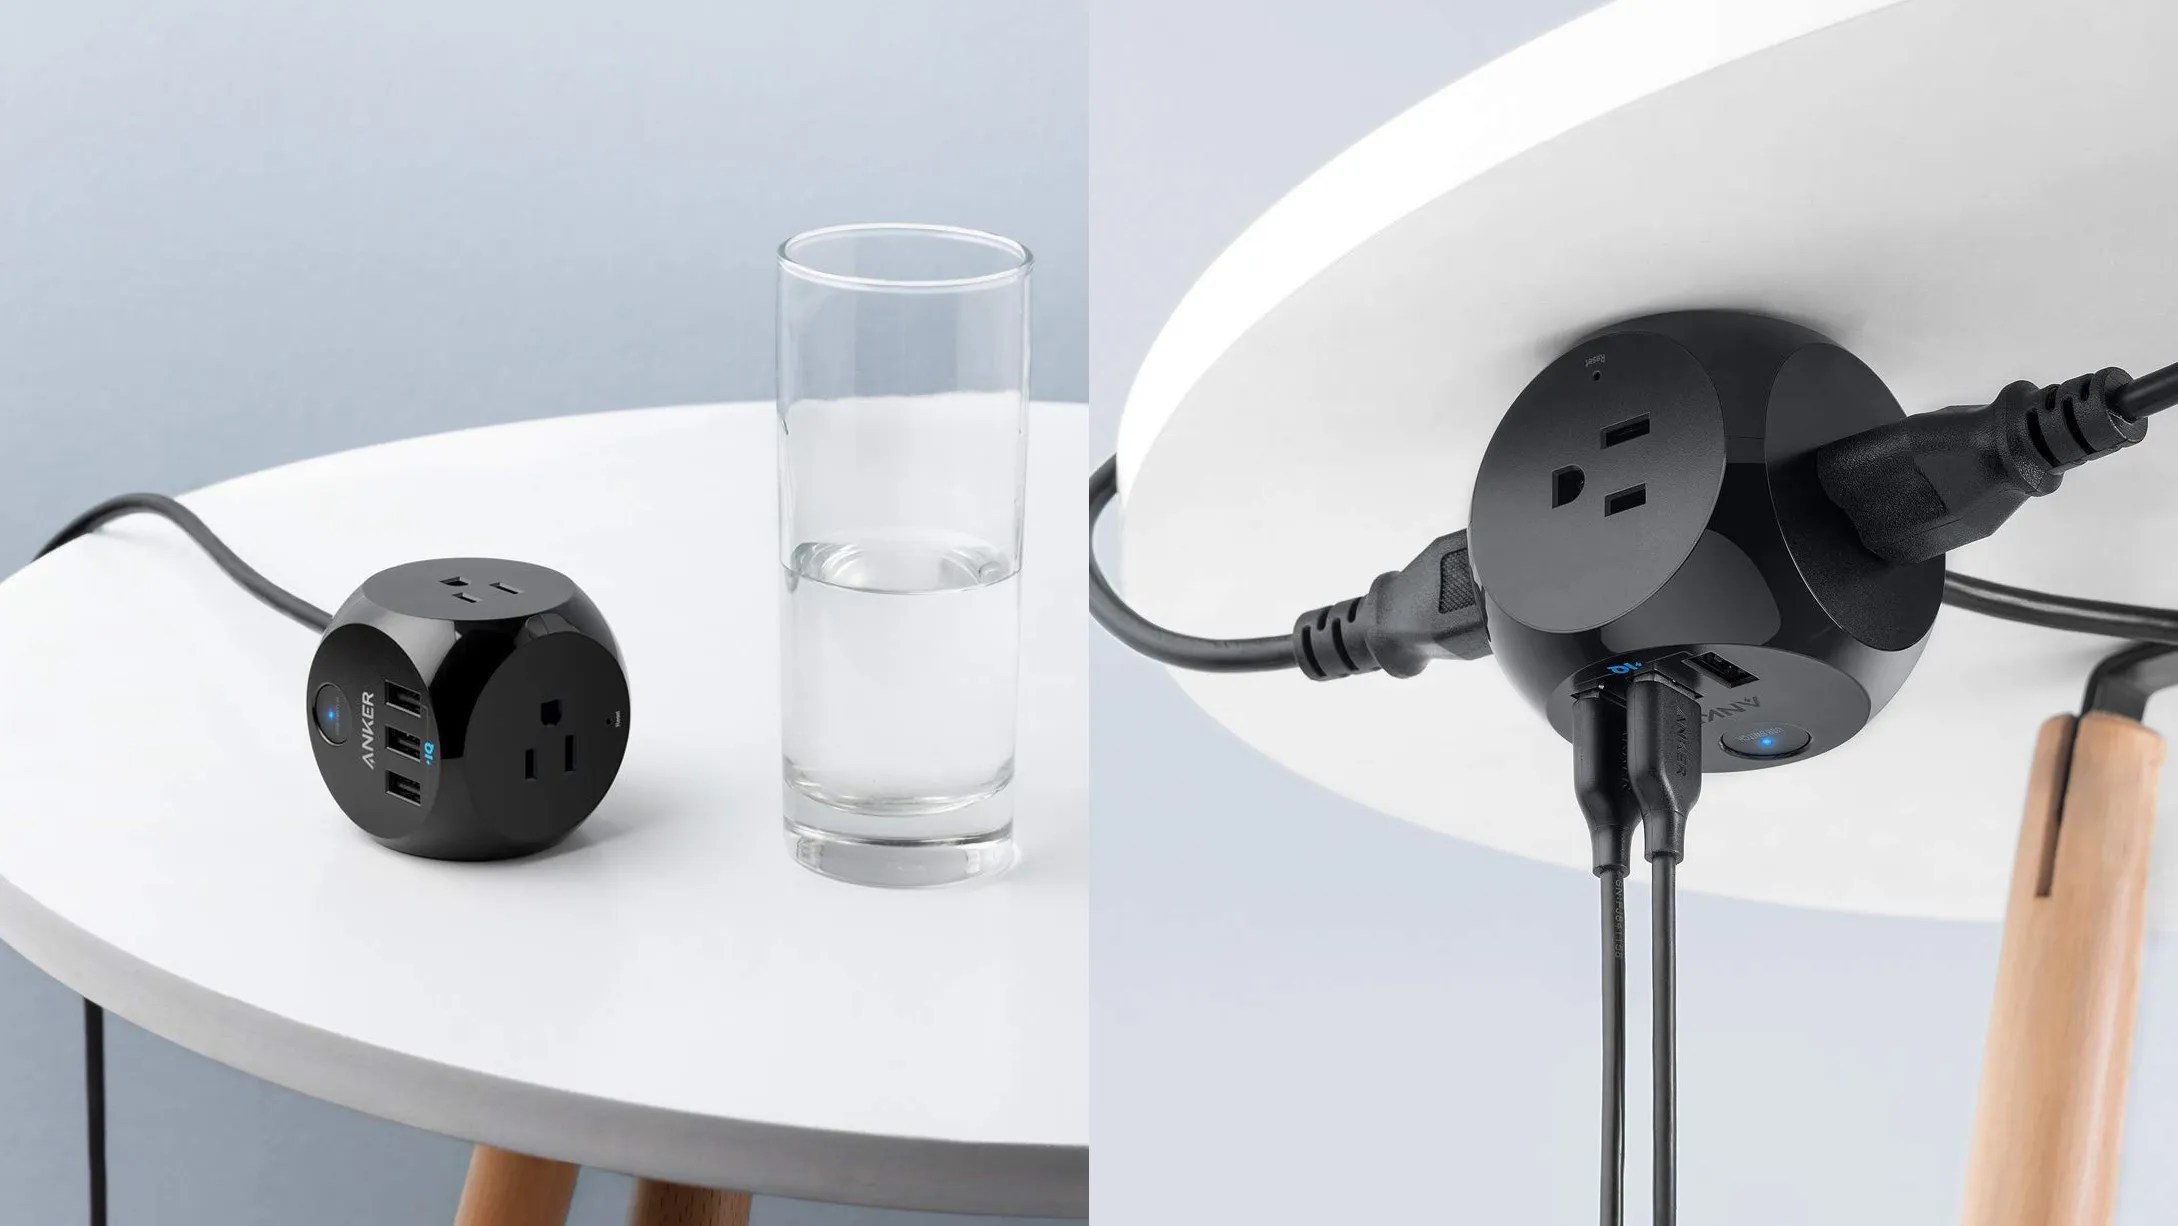 Get all the outlet space you need without a bulky power strip.